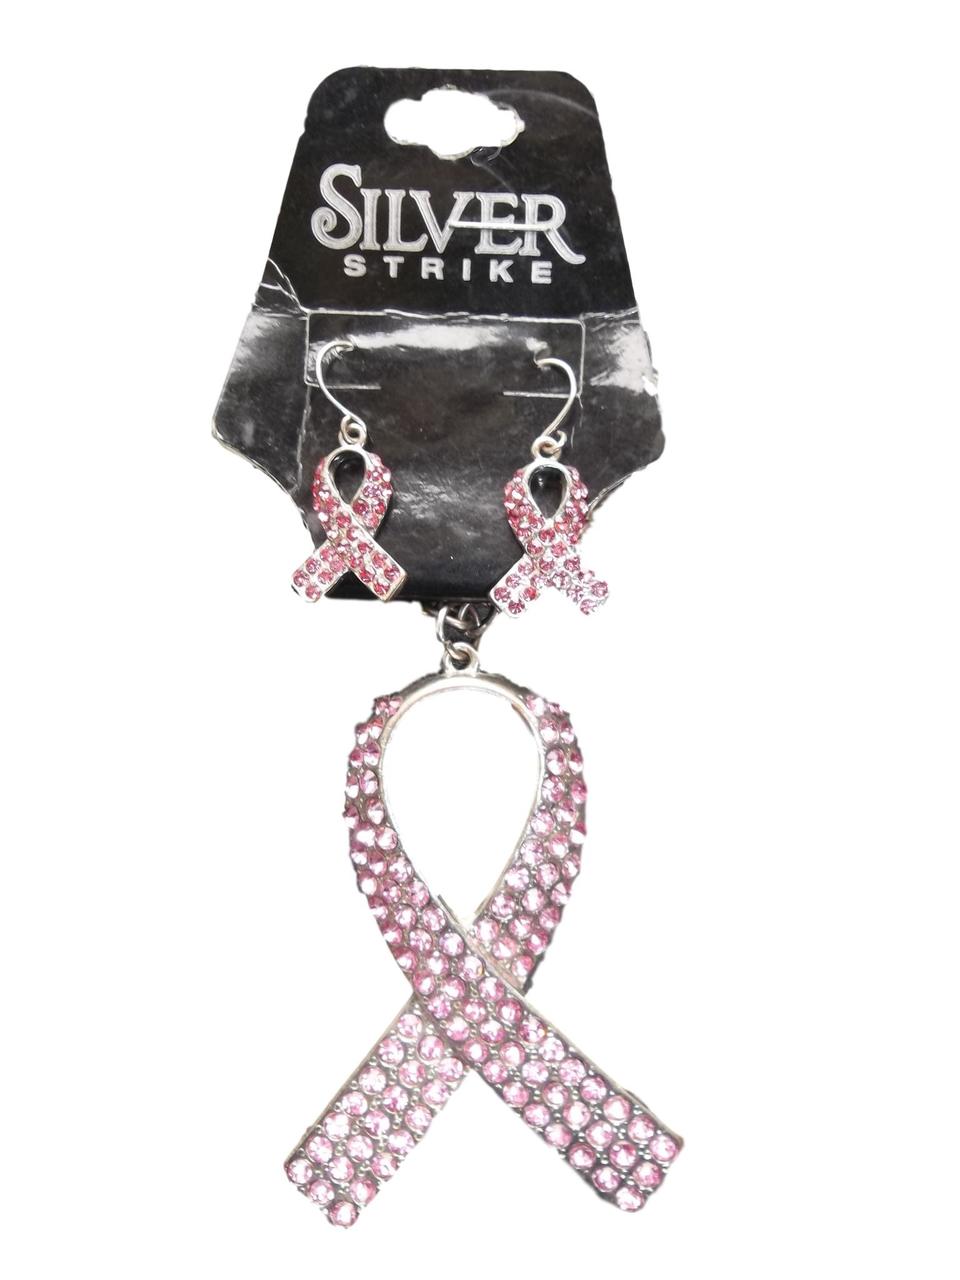 Silver Strike Breast Cancer Necklace and Earing Set